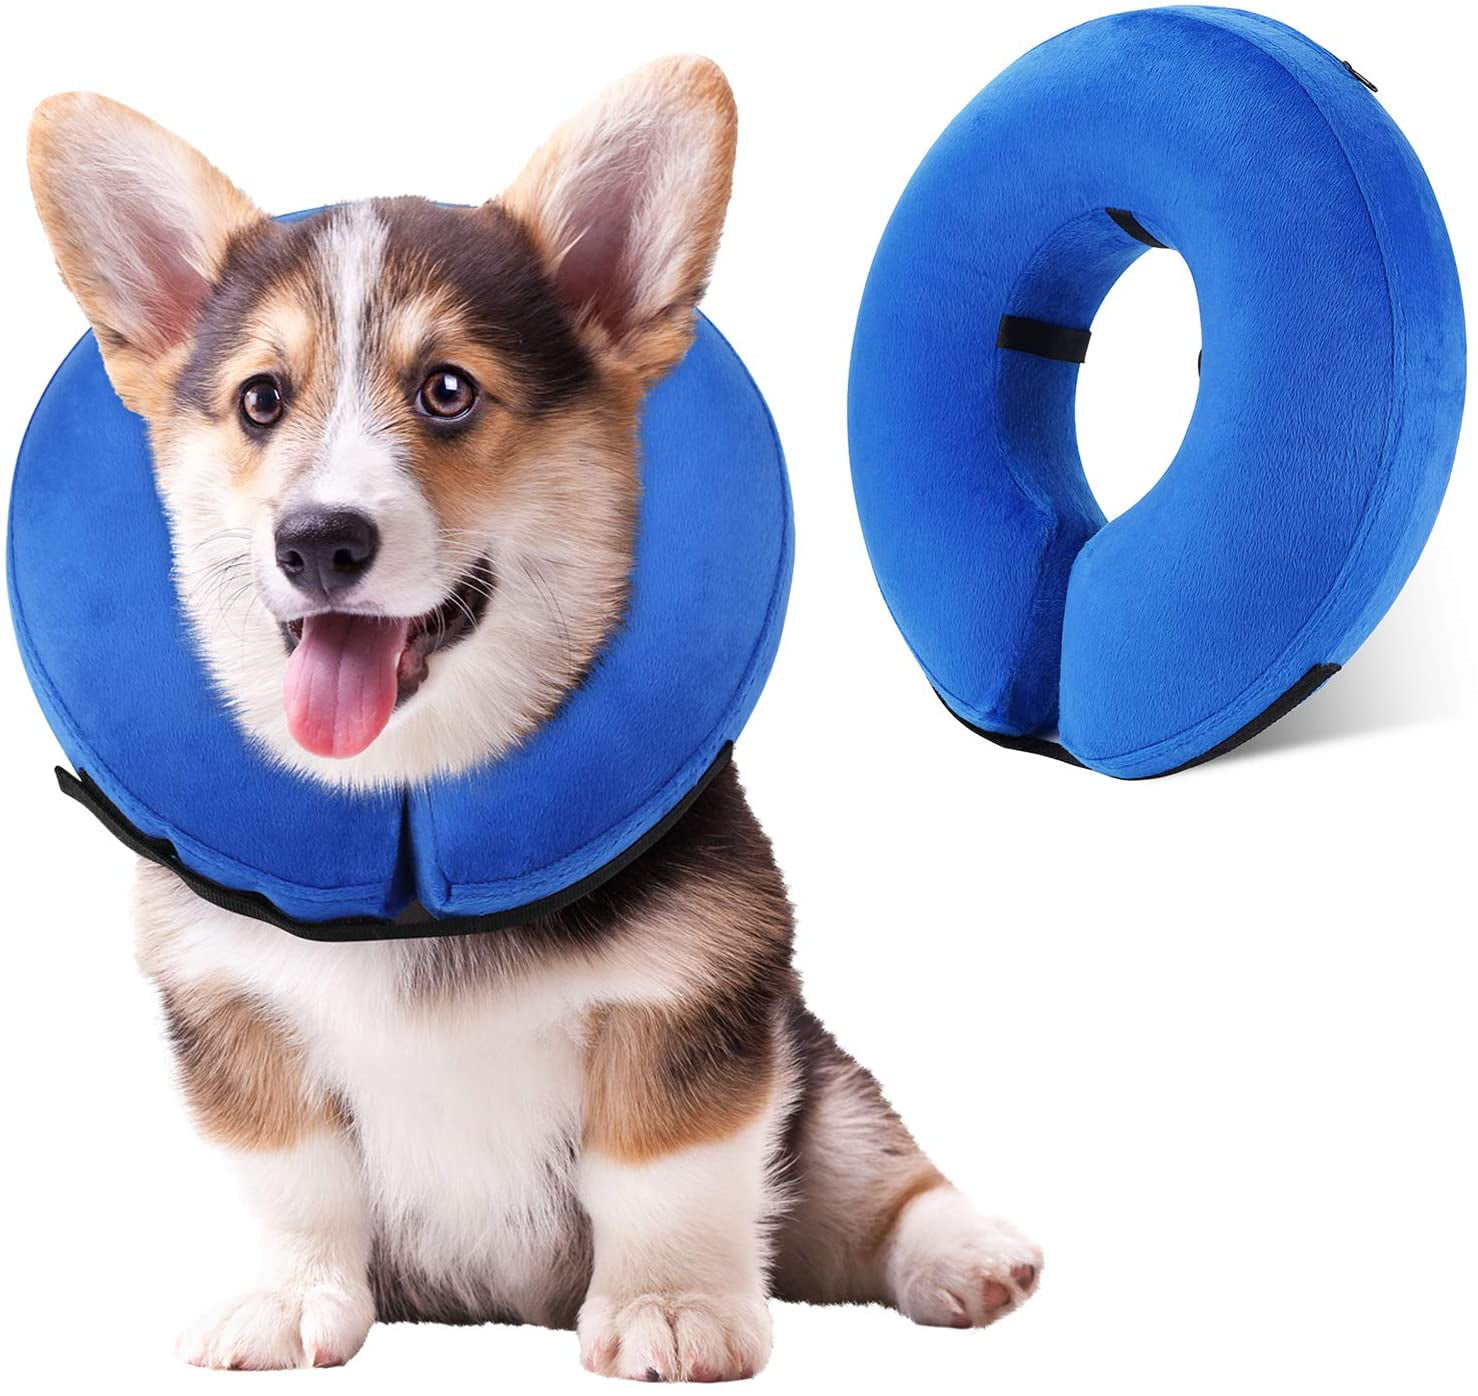 Anti-Bite/Lick Bite- Water-Resistant Easy to Wipe Aolvo Cat Recovery Collar Durable Scratch Soft Comfy Cone E-Collar After Surgery for Small Size Dogs Too Check Picture for Size Chart